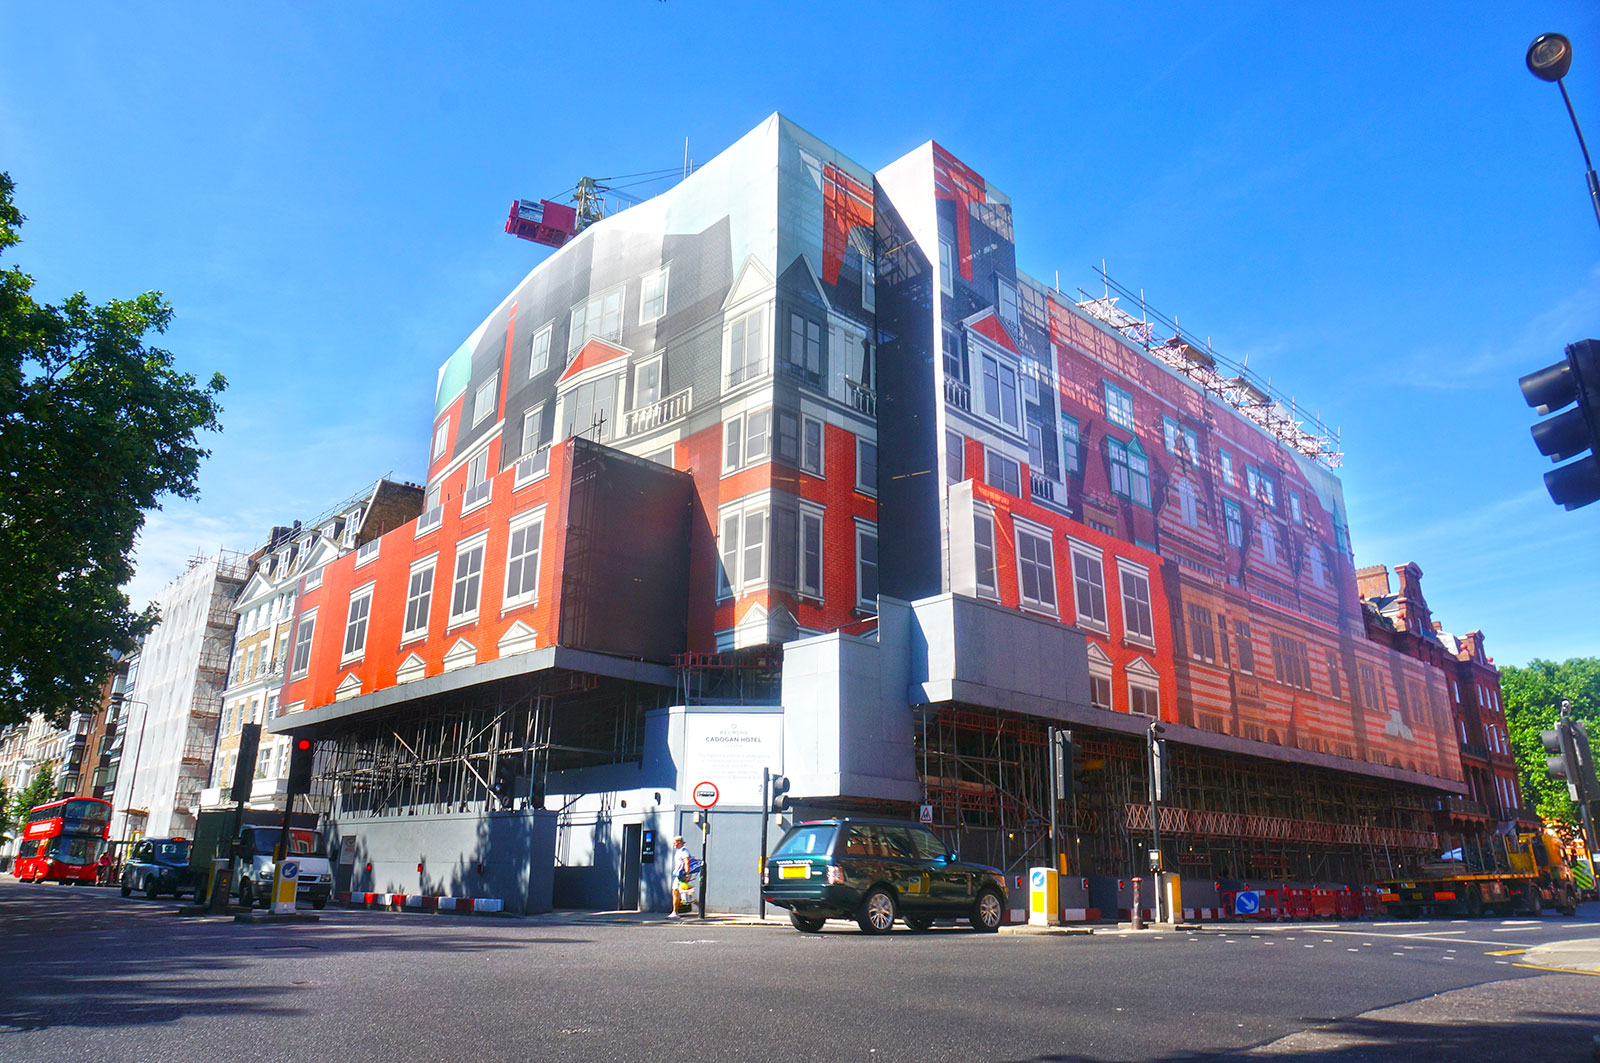 Printed scaffolding covers on a building in London